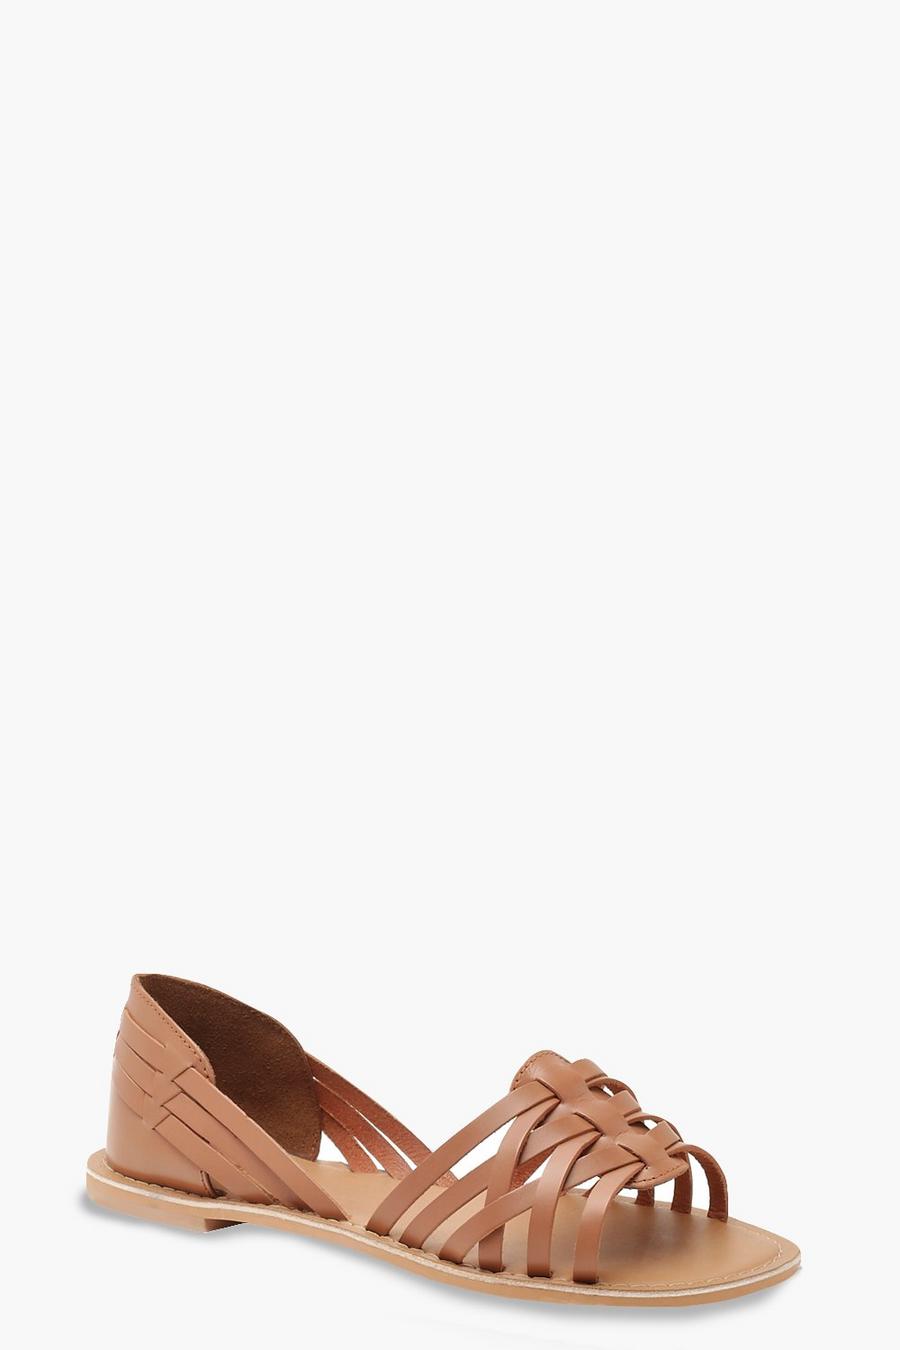 Tan brown Wide Fit Woven Leather Ballet Flats